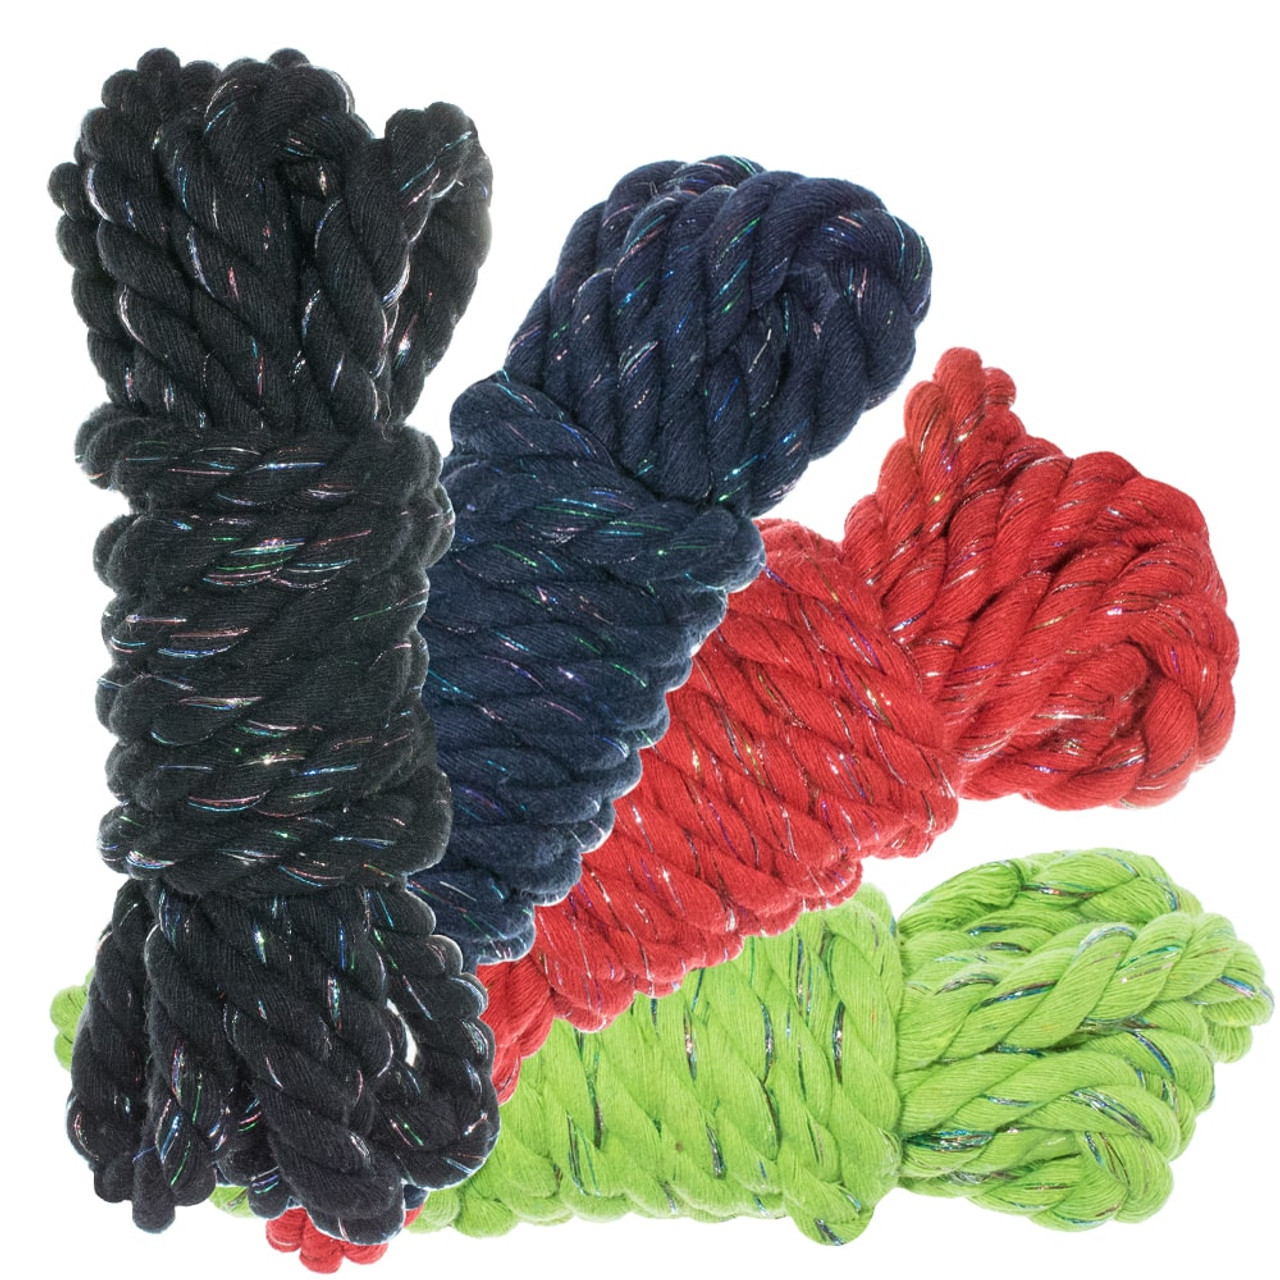 1/2 Twisted Cotton Rope 100' Kit - Dazzle